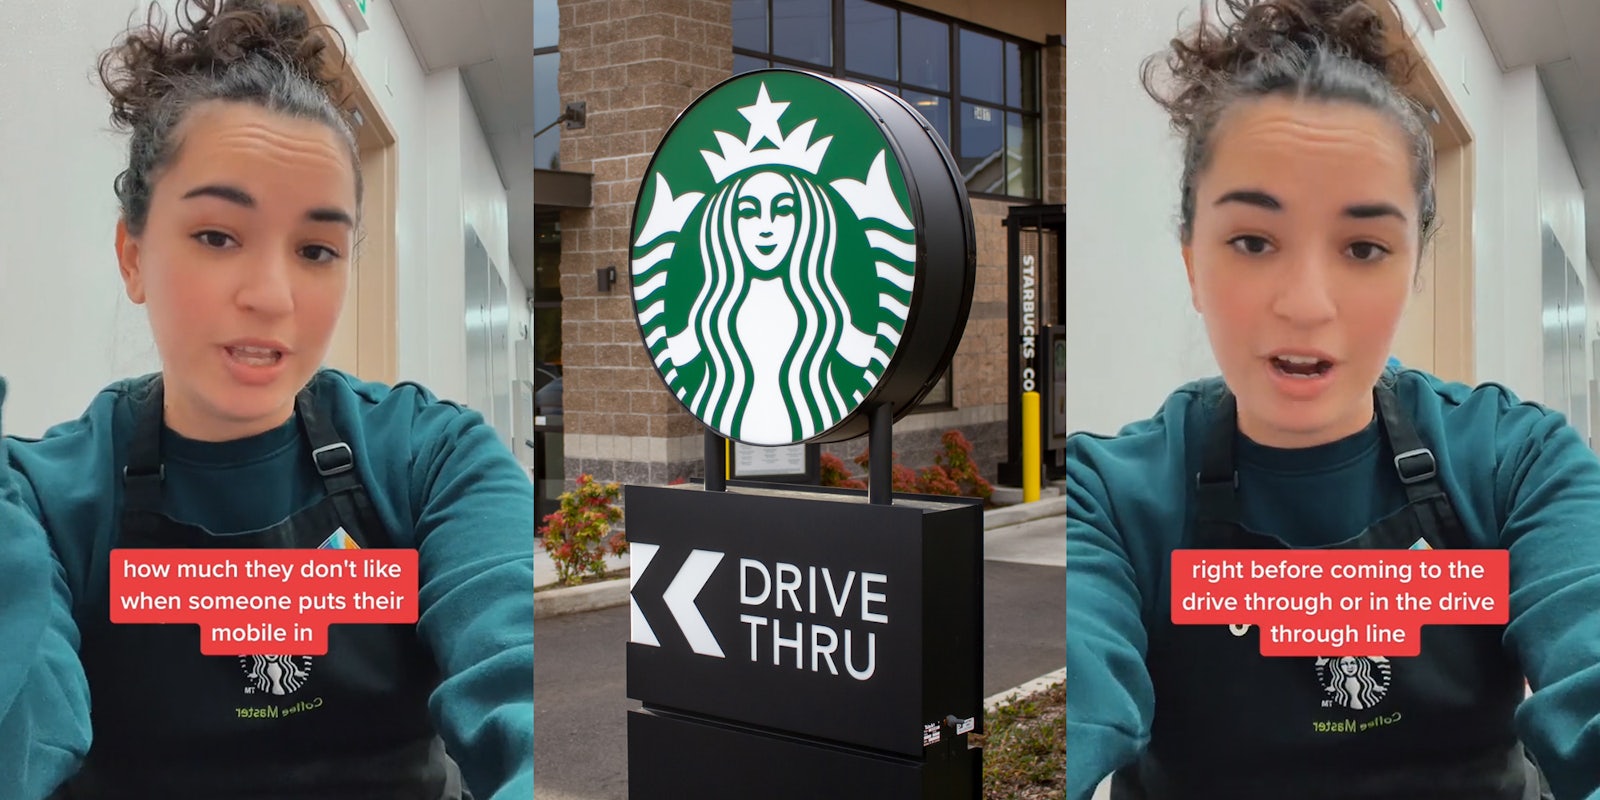 Starbucks barista speaking with caption 'how much they don't like when someone puts their mobile order in' (l) Starbucks drive thru sign outside of building (c) Starbucks barista speaking with caption 'right before coming to the drive through or in the drive through line' (r)